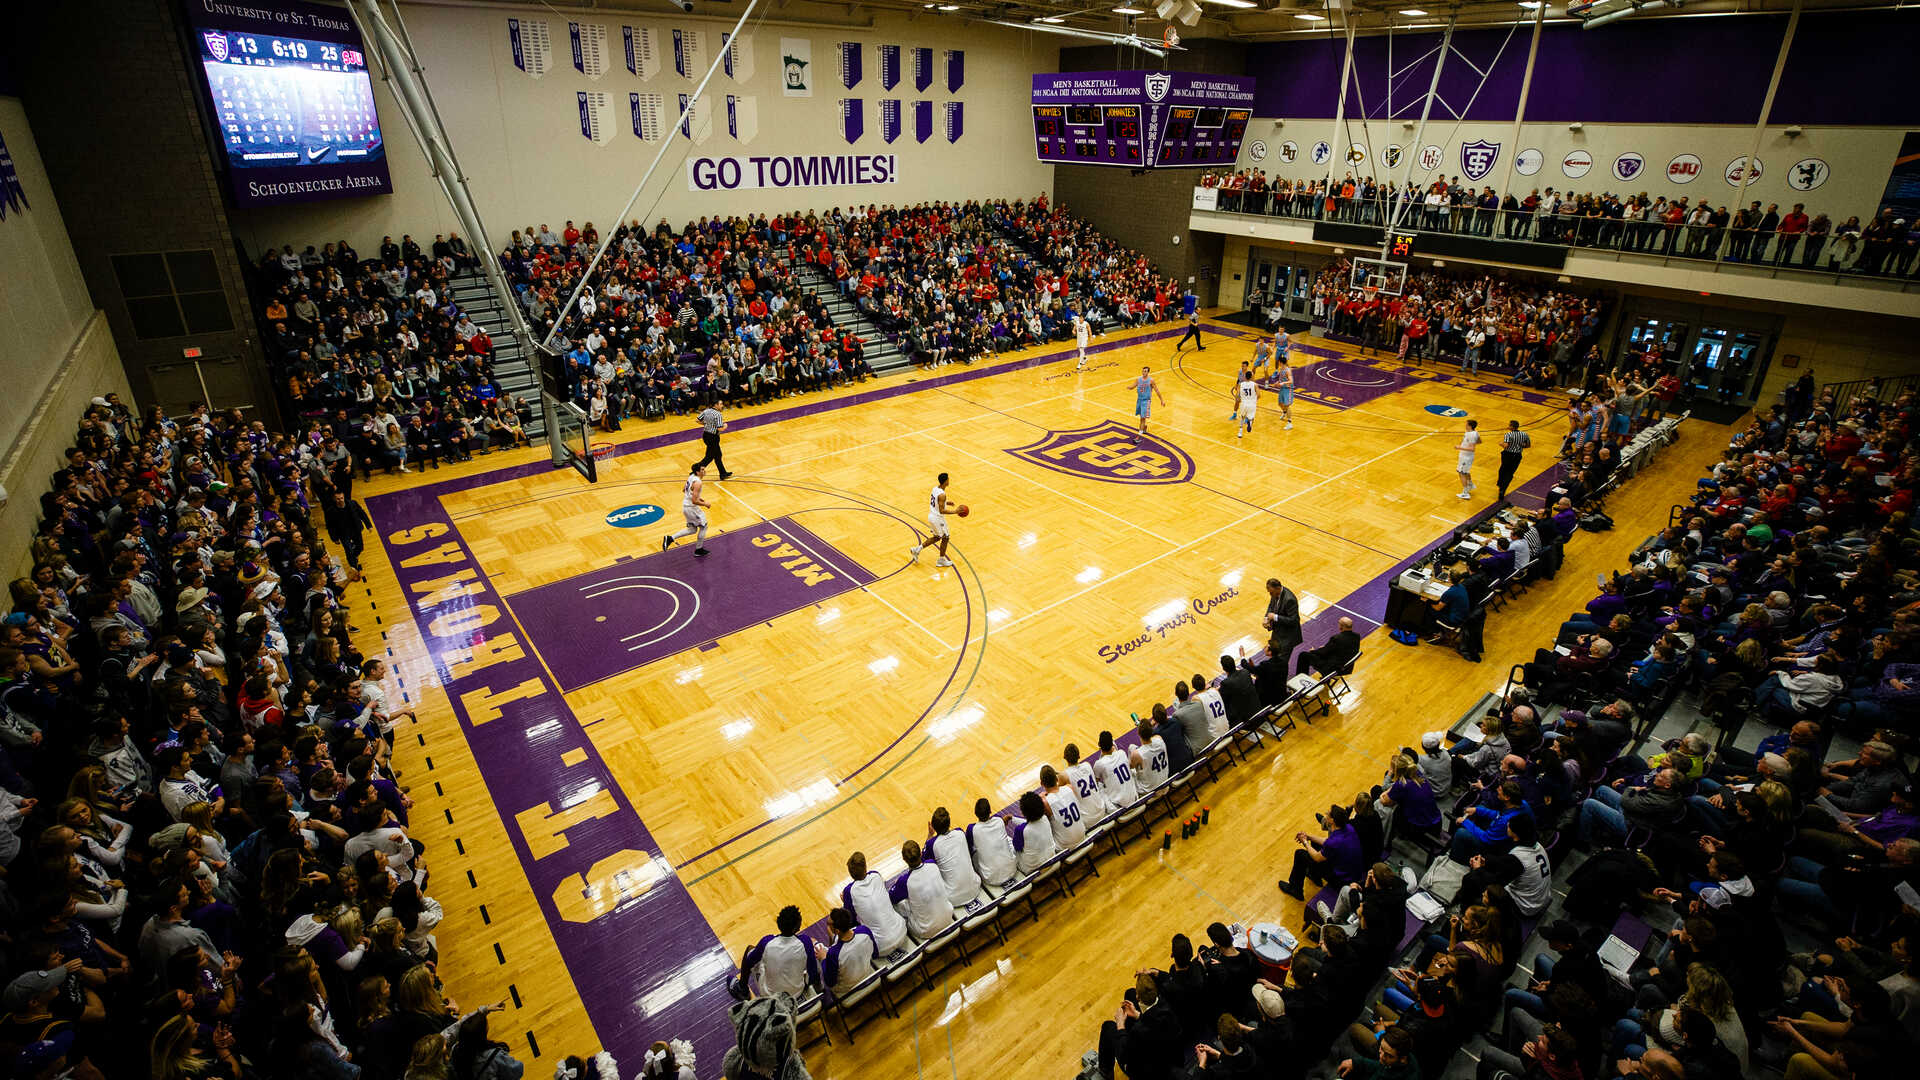 Overview of St. Thomas men's basketball game